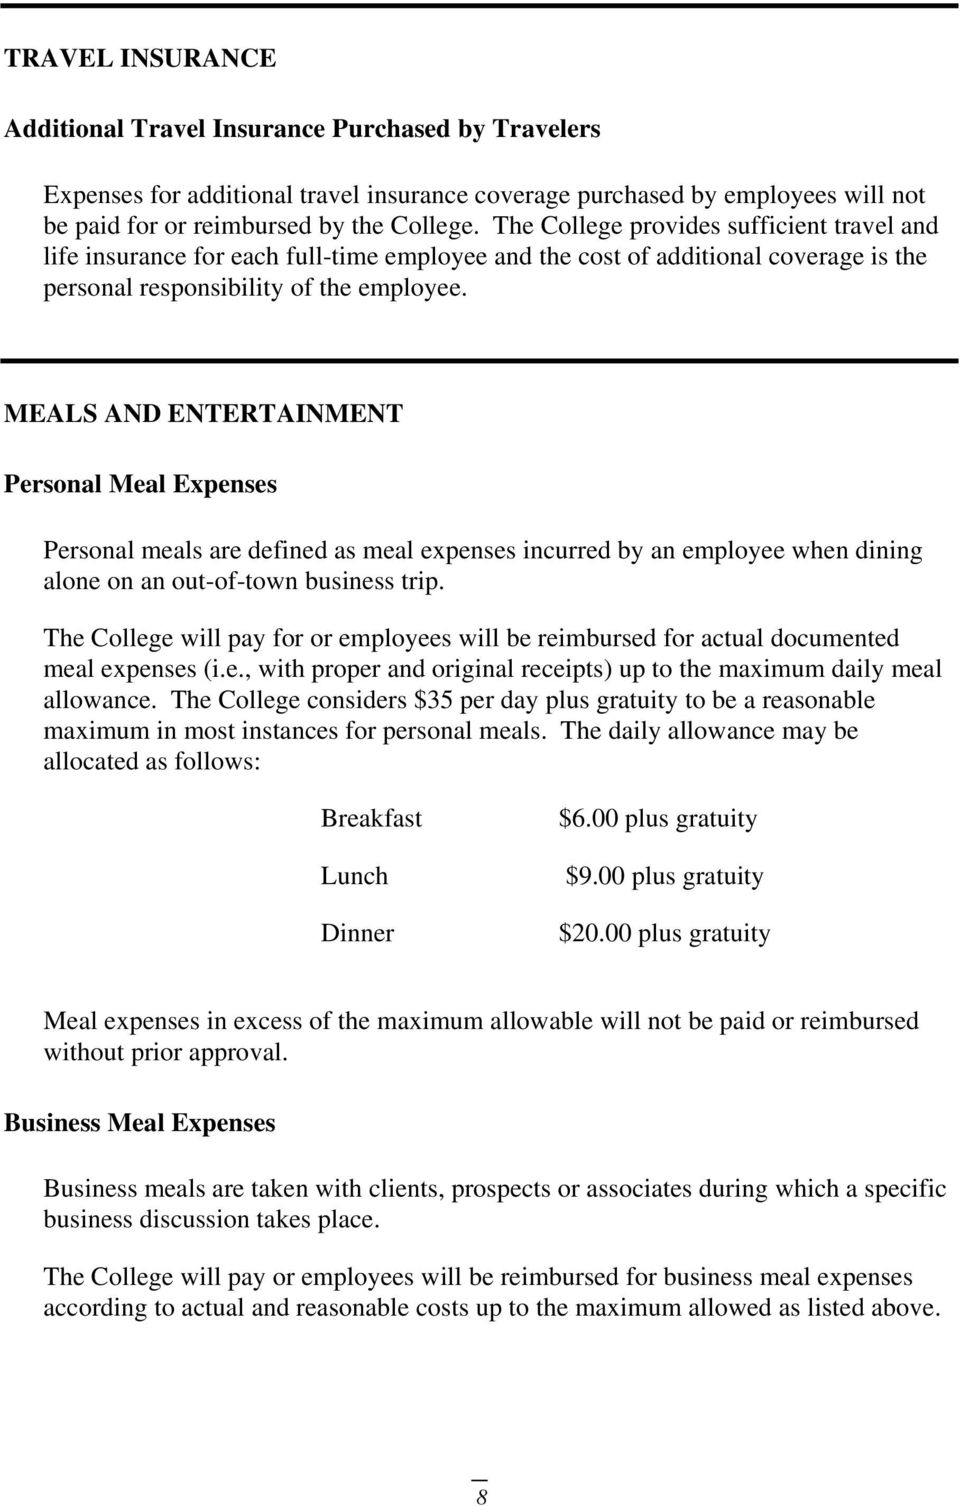 MEALS AND ENTERTAINMENT Personal Meal Expenses Personal meals are defined as meal expenses incurred by an employee when dining alone on an out-of-town business trip.